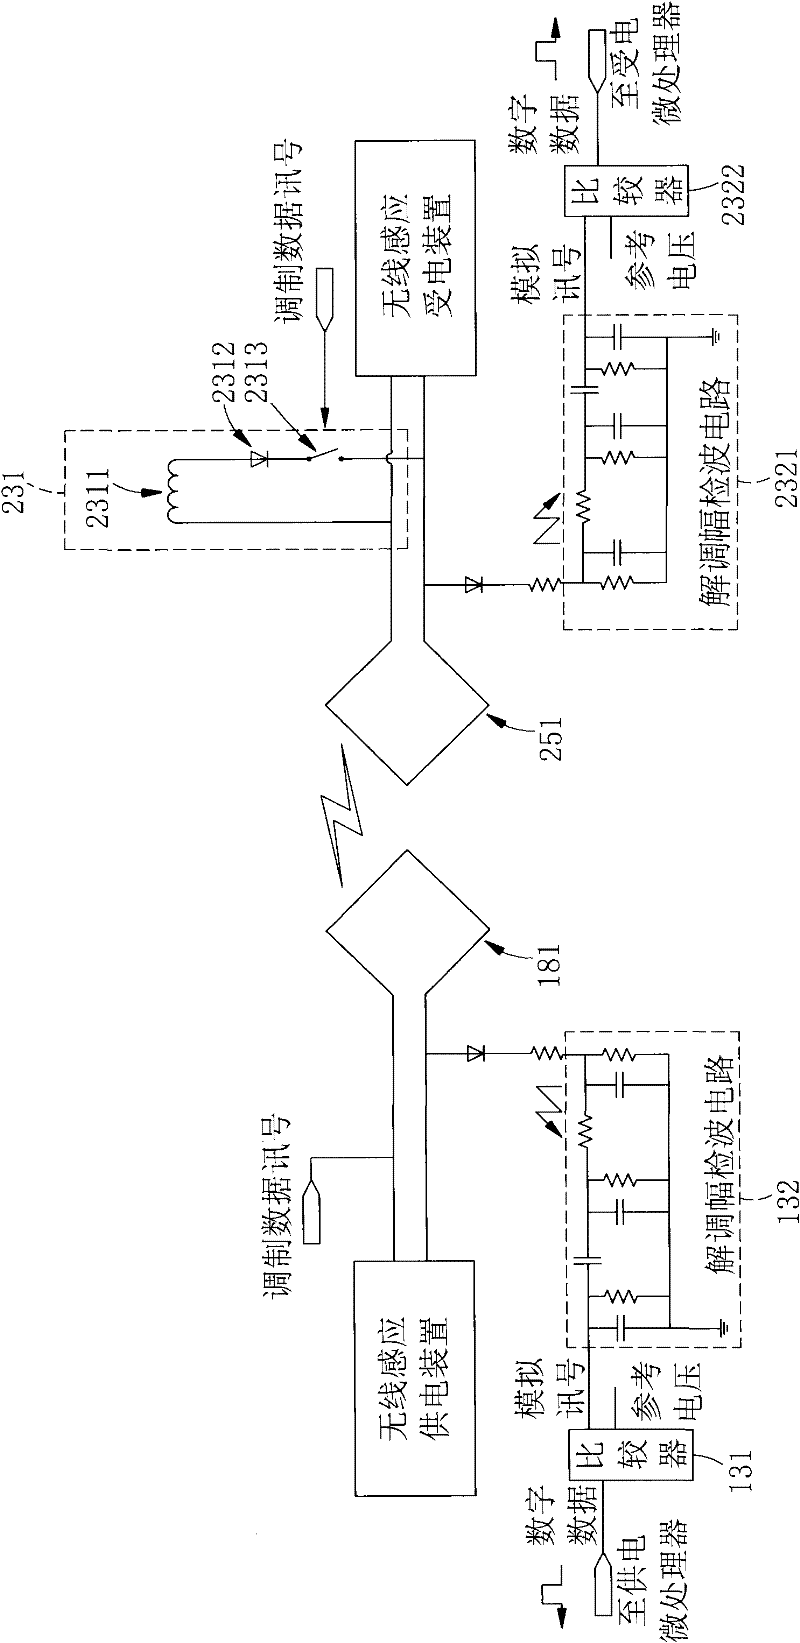 Method of Data Transmission in Inductive Power Supply